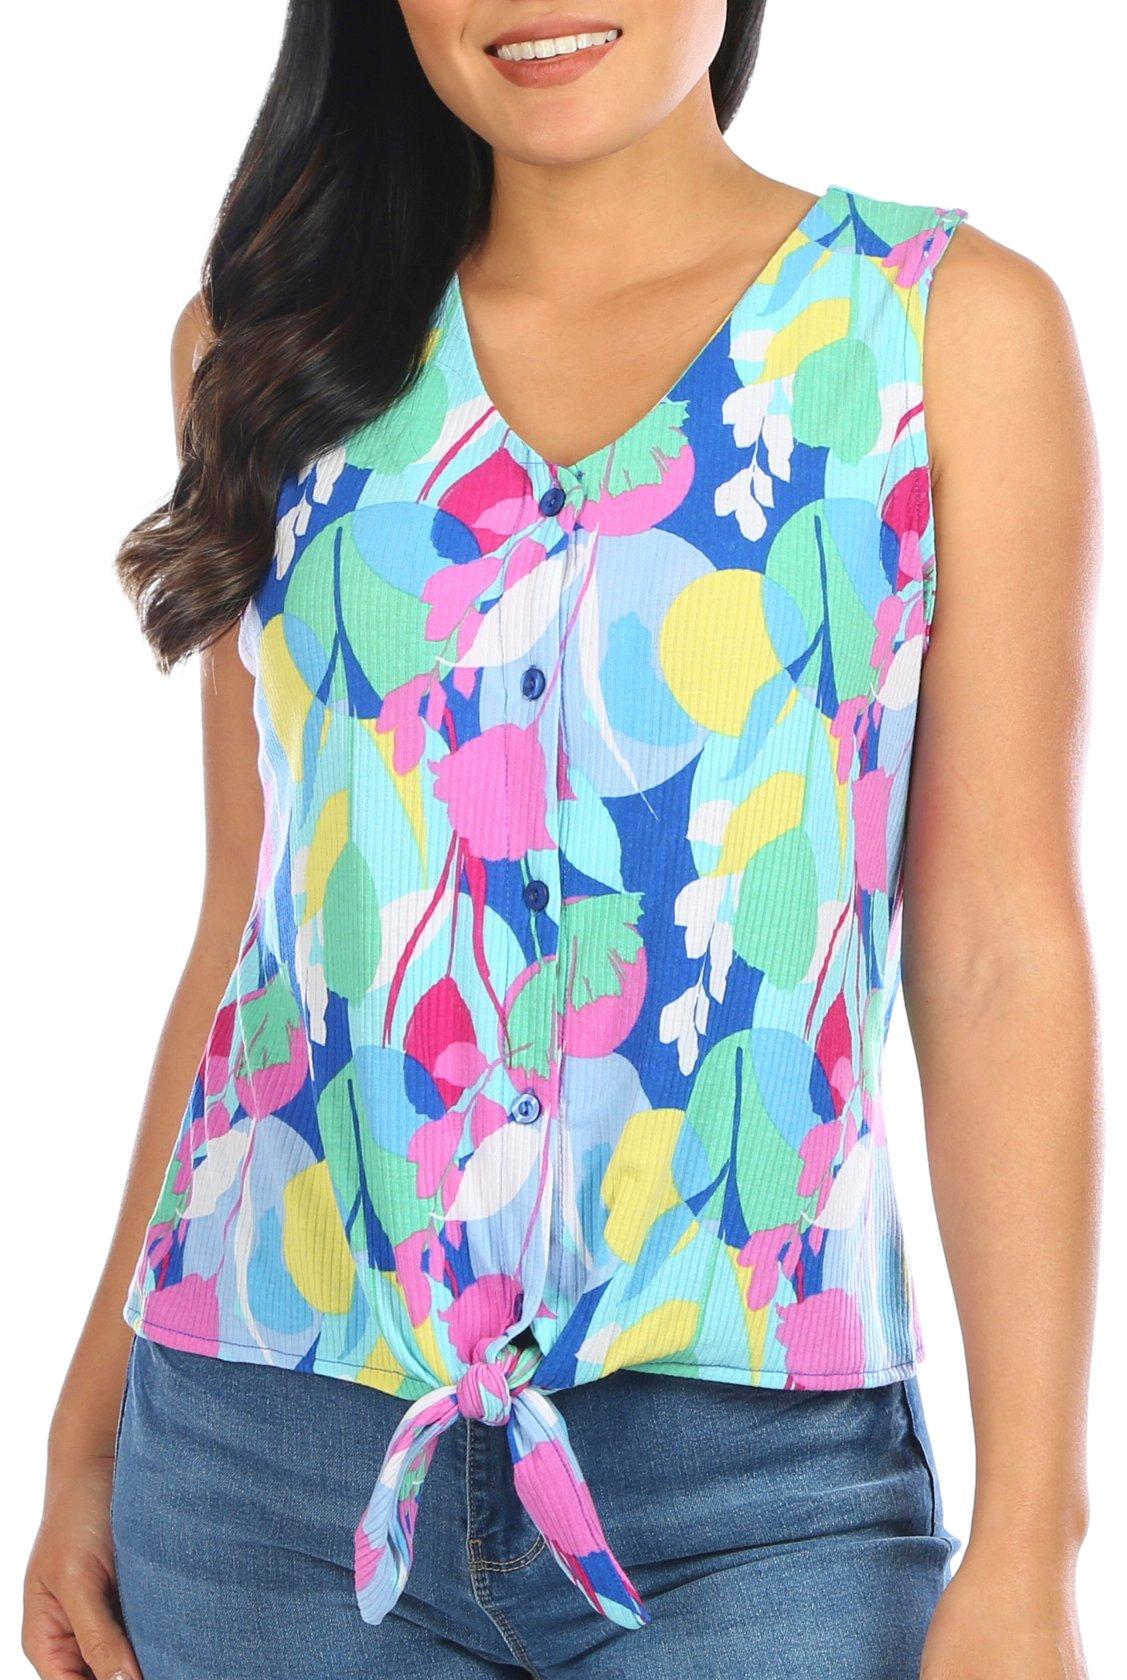 Juniper + Lime Womens Colorful Tie Front Sleeveless Top